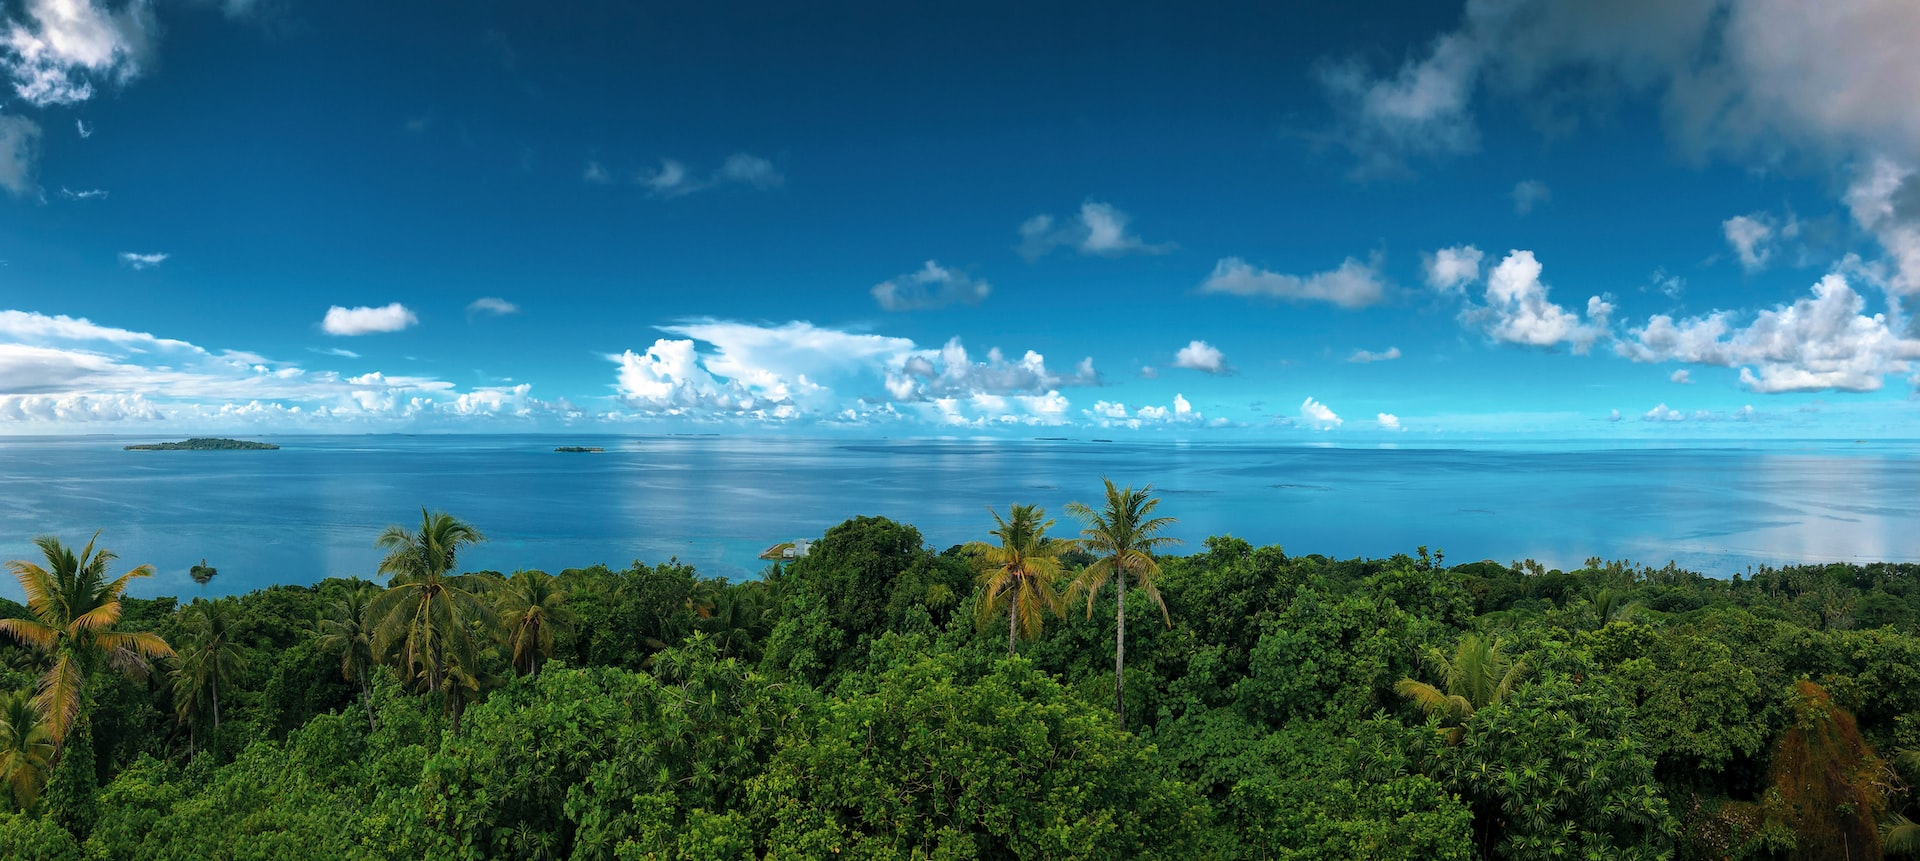 Aerial view of Chuuk Lagoon in Micronesia, with rolls of clouds above and a reach foliage in the foreground